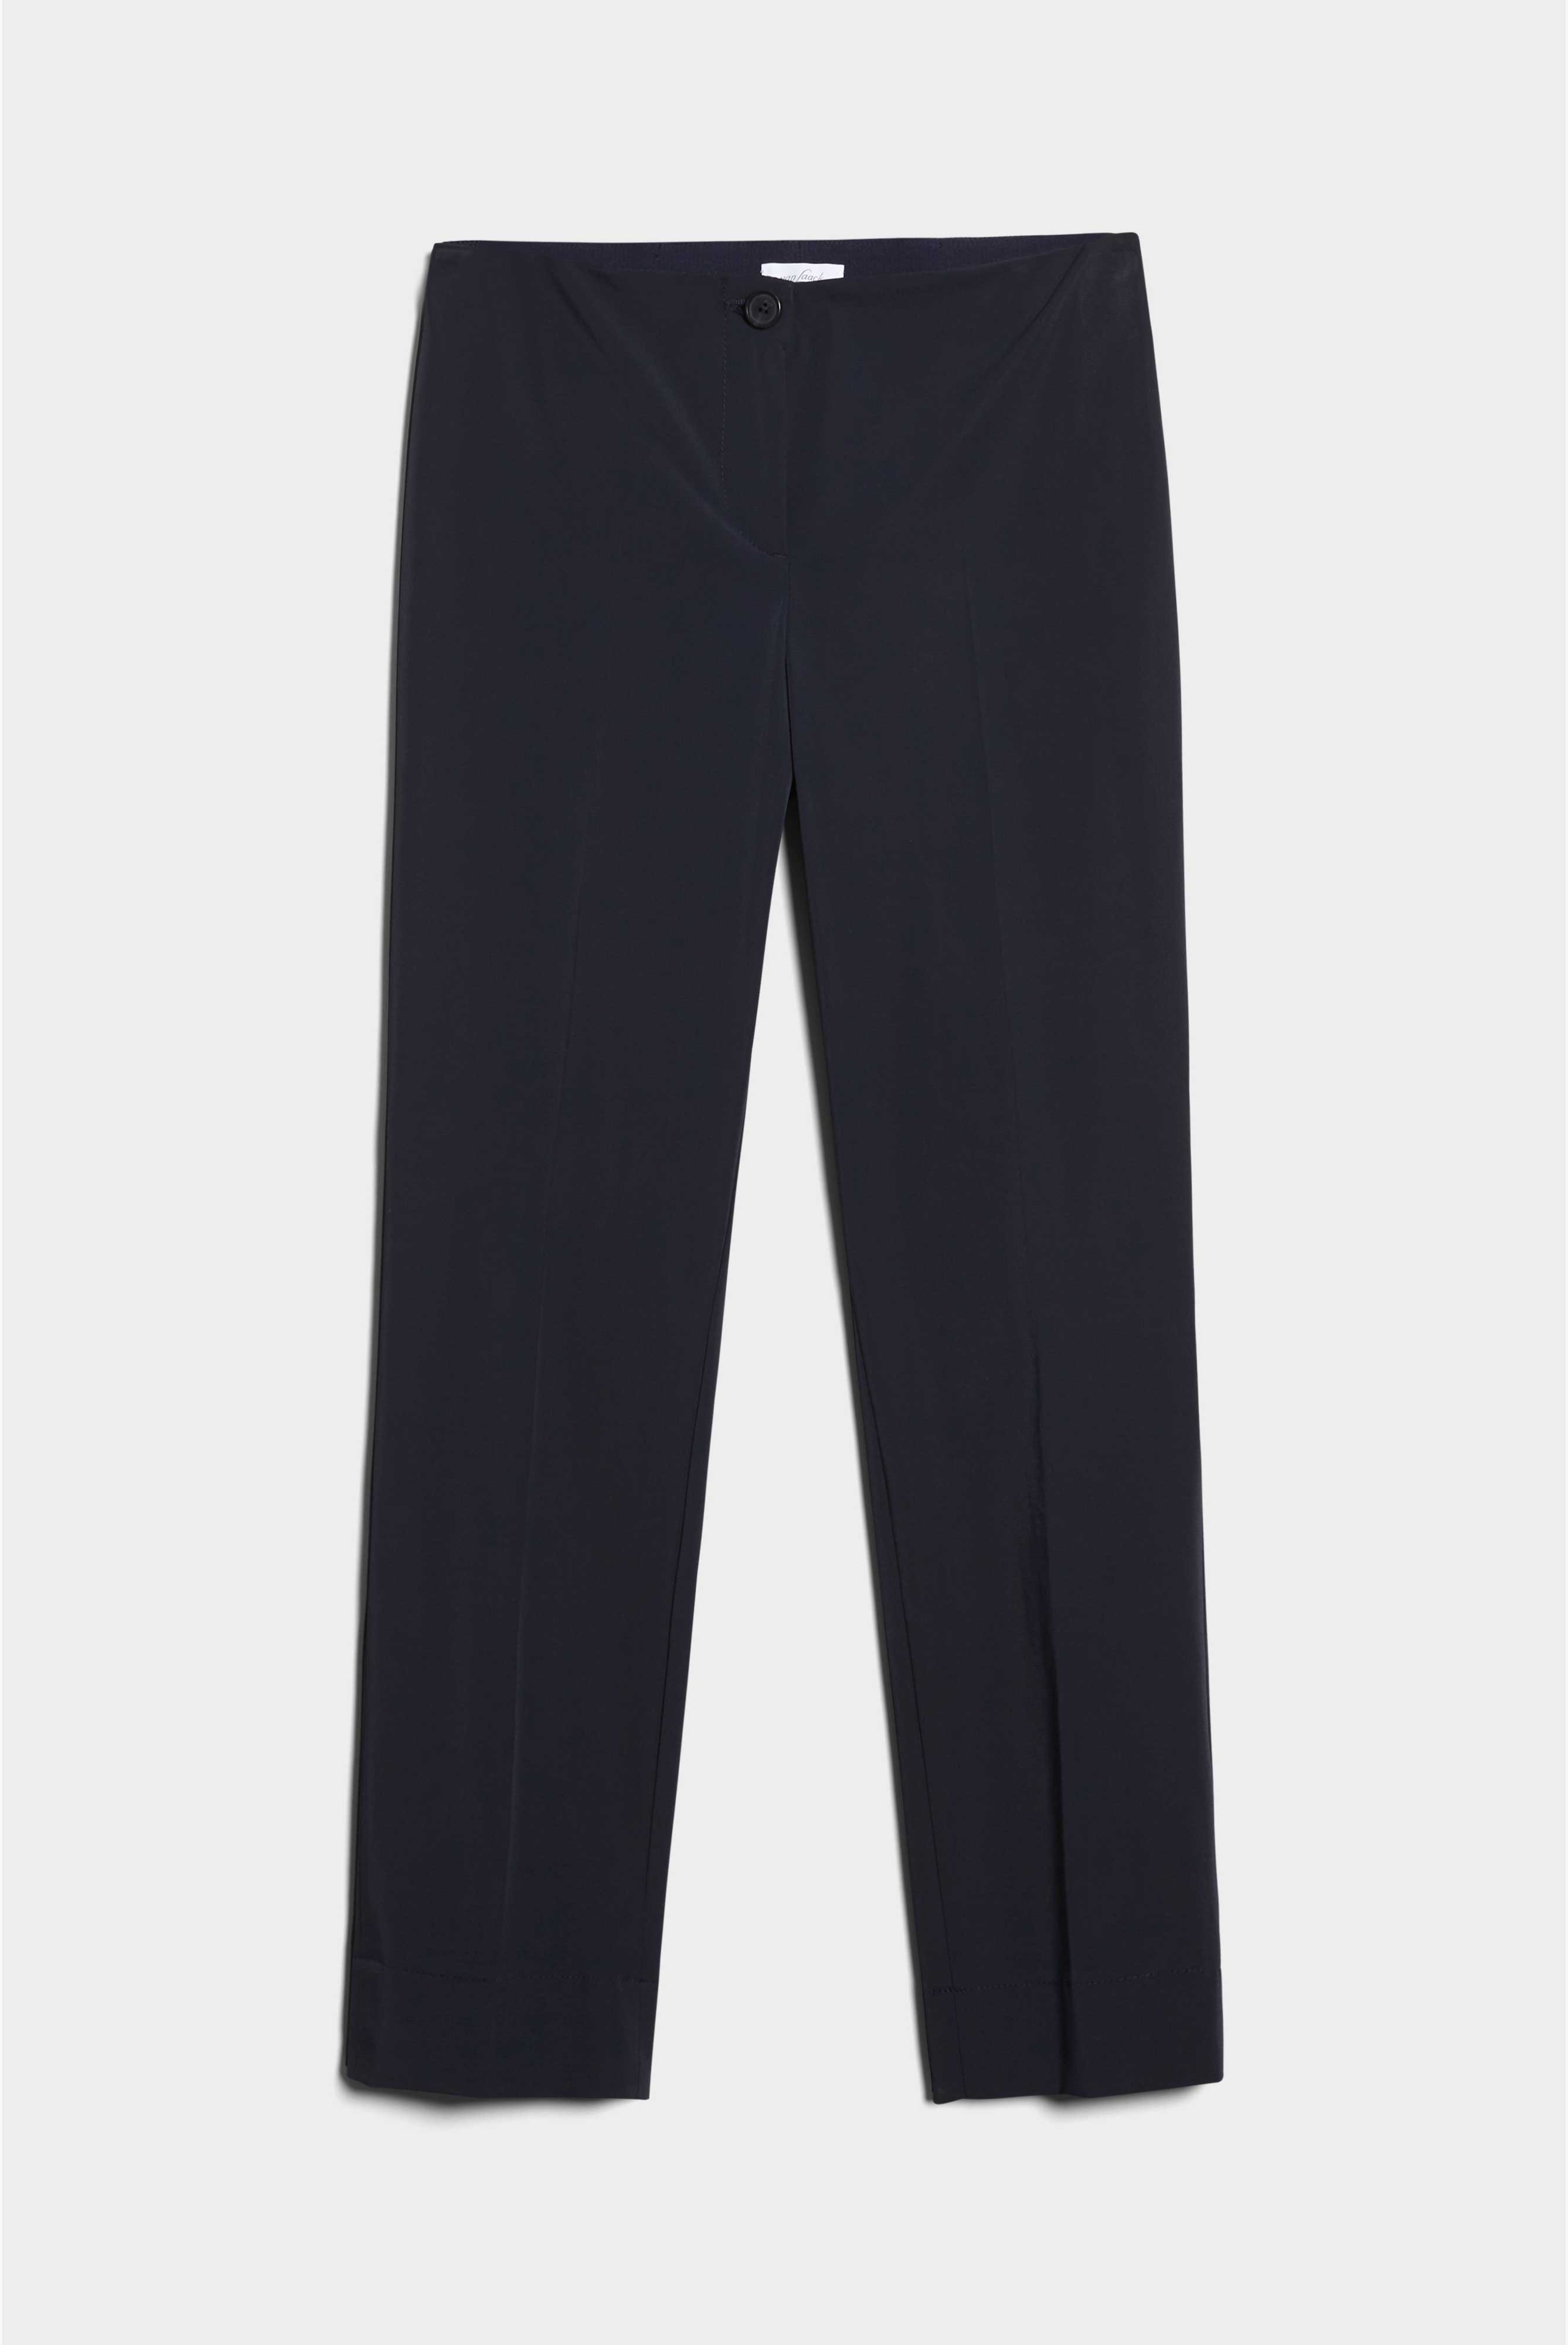 Jeans & Trousers+Business trousers with stretch+04.635K..J00144.790.40